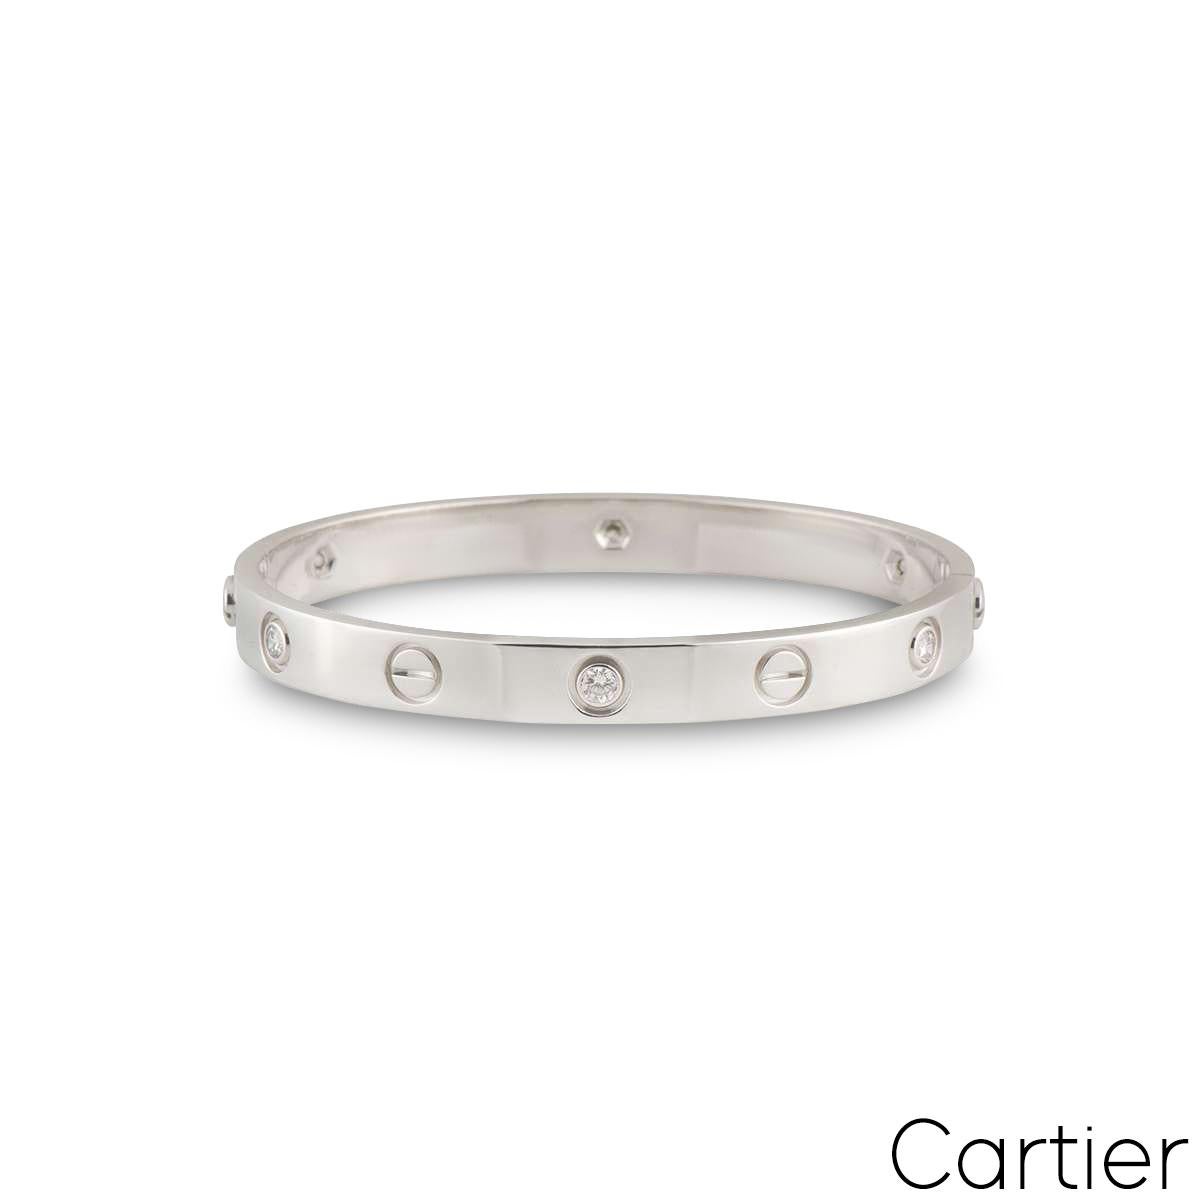 A iconic 18k white gold Cartier diamond bracelet from the Love collection. The bracelet comprises of the iconic screw motifs alternating with round brilliant cut diamonds. There are 6 round brilliant cut diamond in a rubover setting. The bracelet is